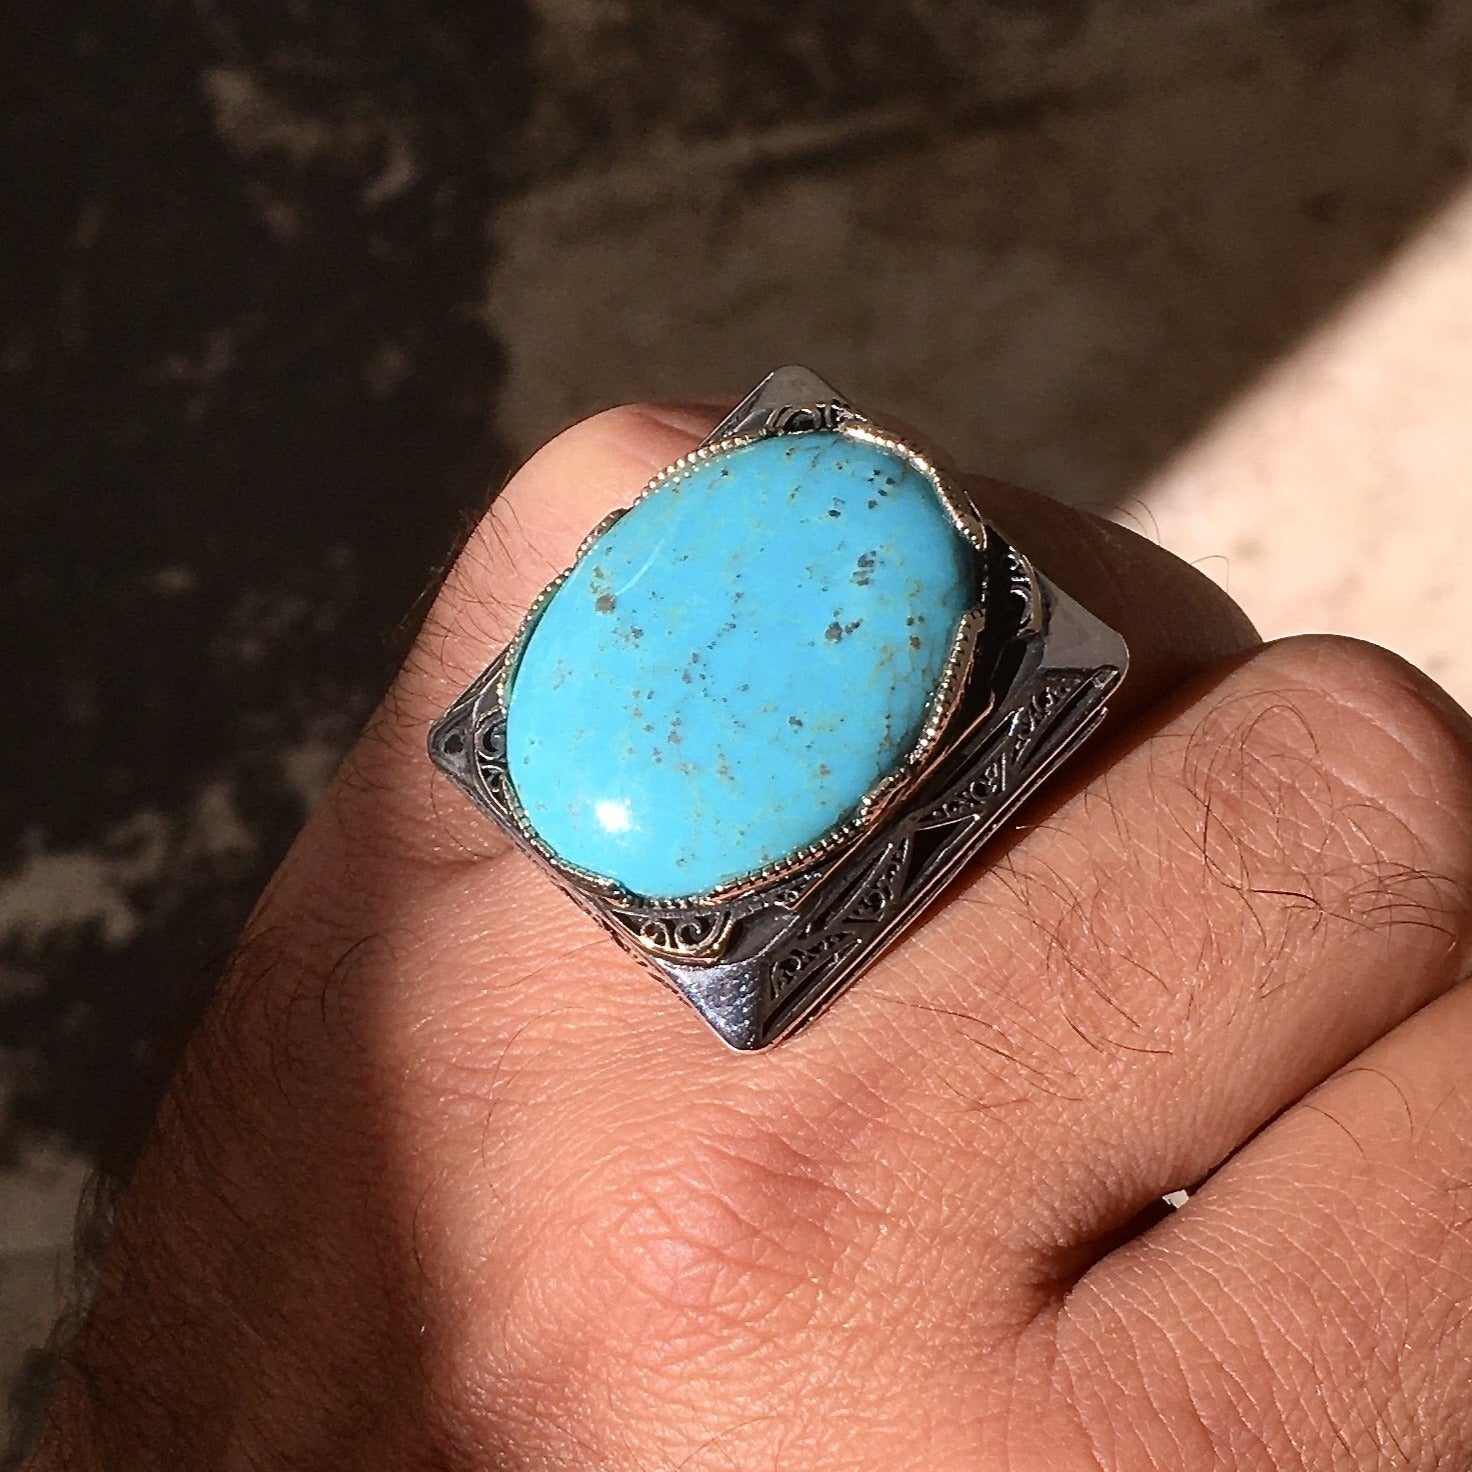 Unique Mens Nautical Ring Vintage Turquoise Rings for Men Jewelry Handmade  Anchor Sailor Navy Man Cool Engraved Seaman Ring Signet Statement - Etsy |  Vintage turquoise ring, Nautical ring, Rings for men